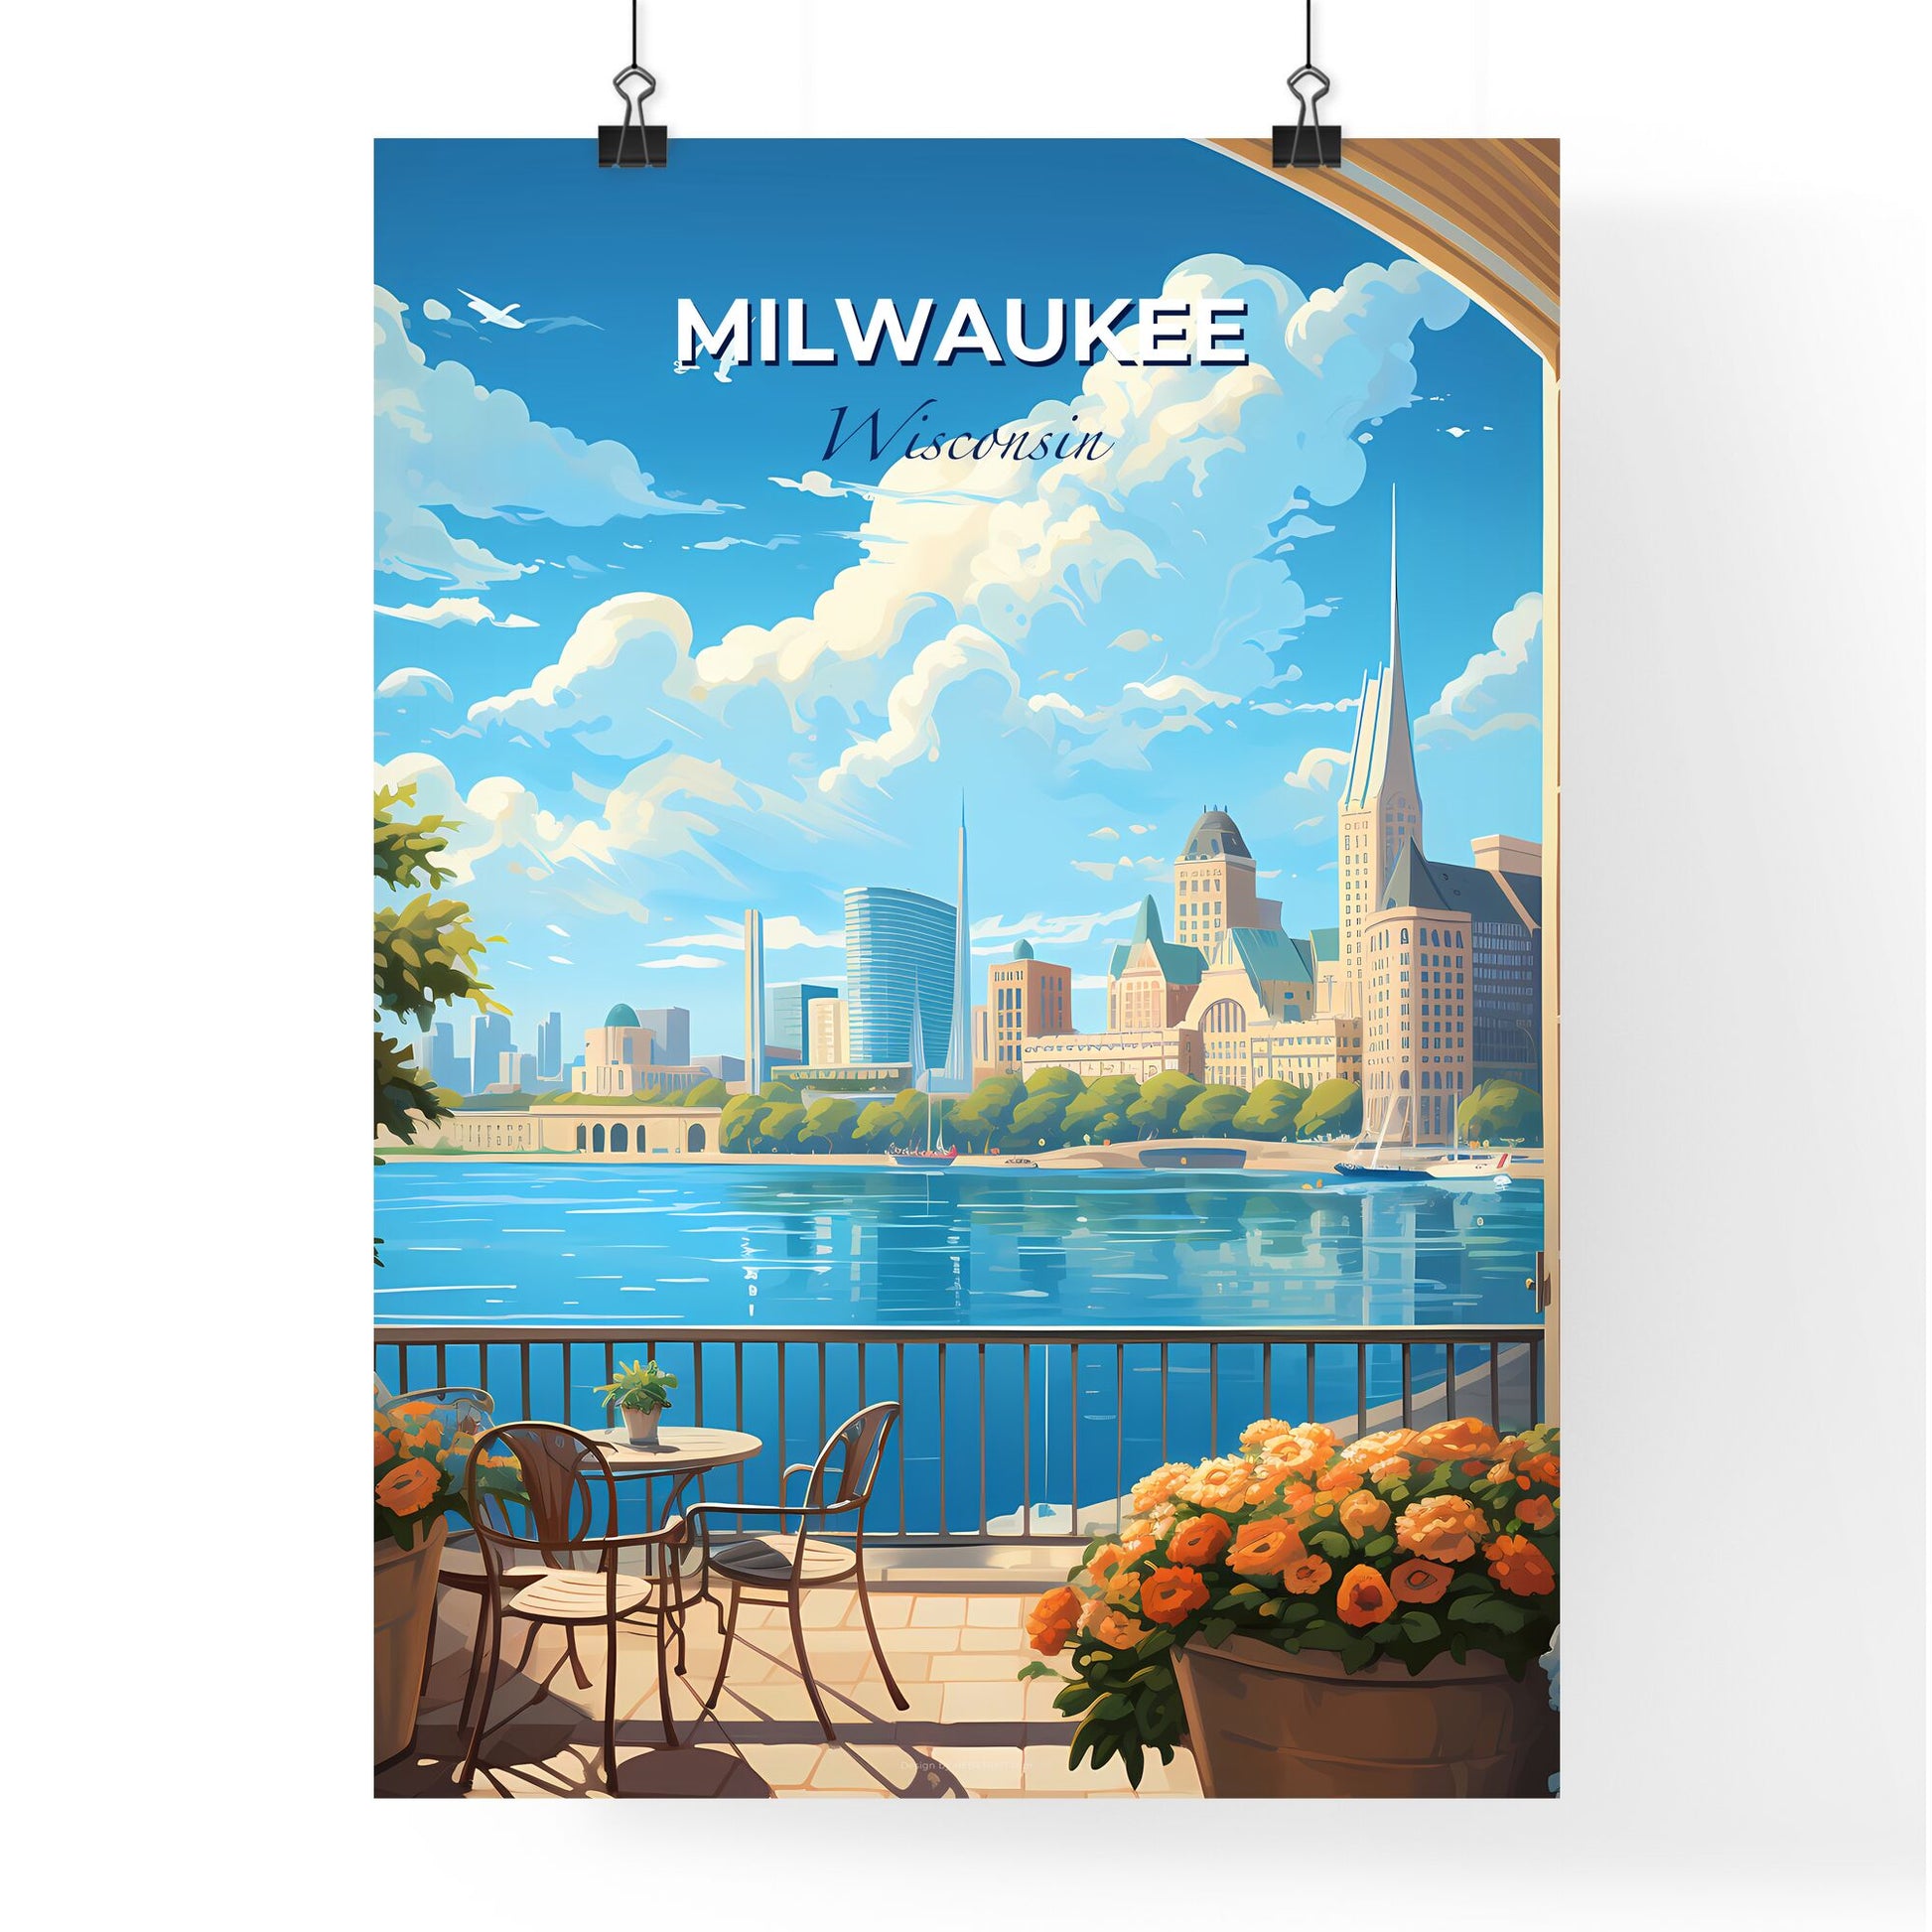 Milwaukee Wisconsin Skyline - A View Of A City From A Balcony - Customizable Travel Gift Default Title